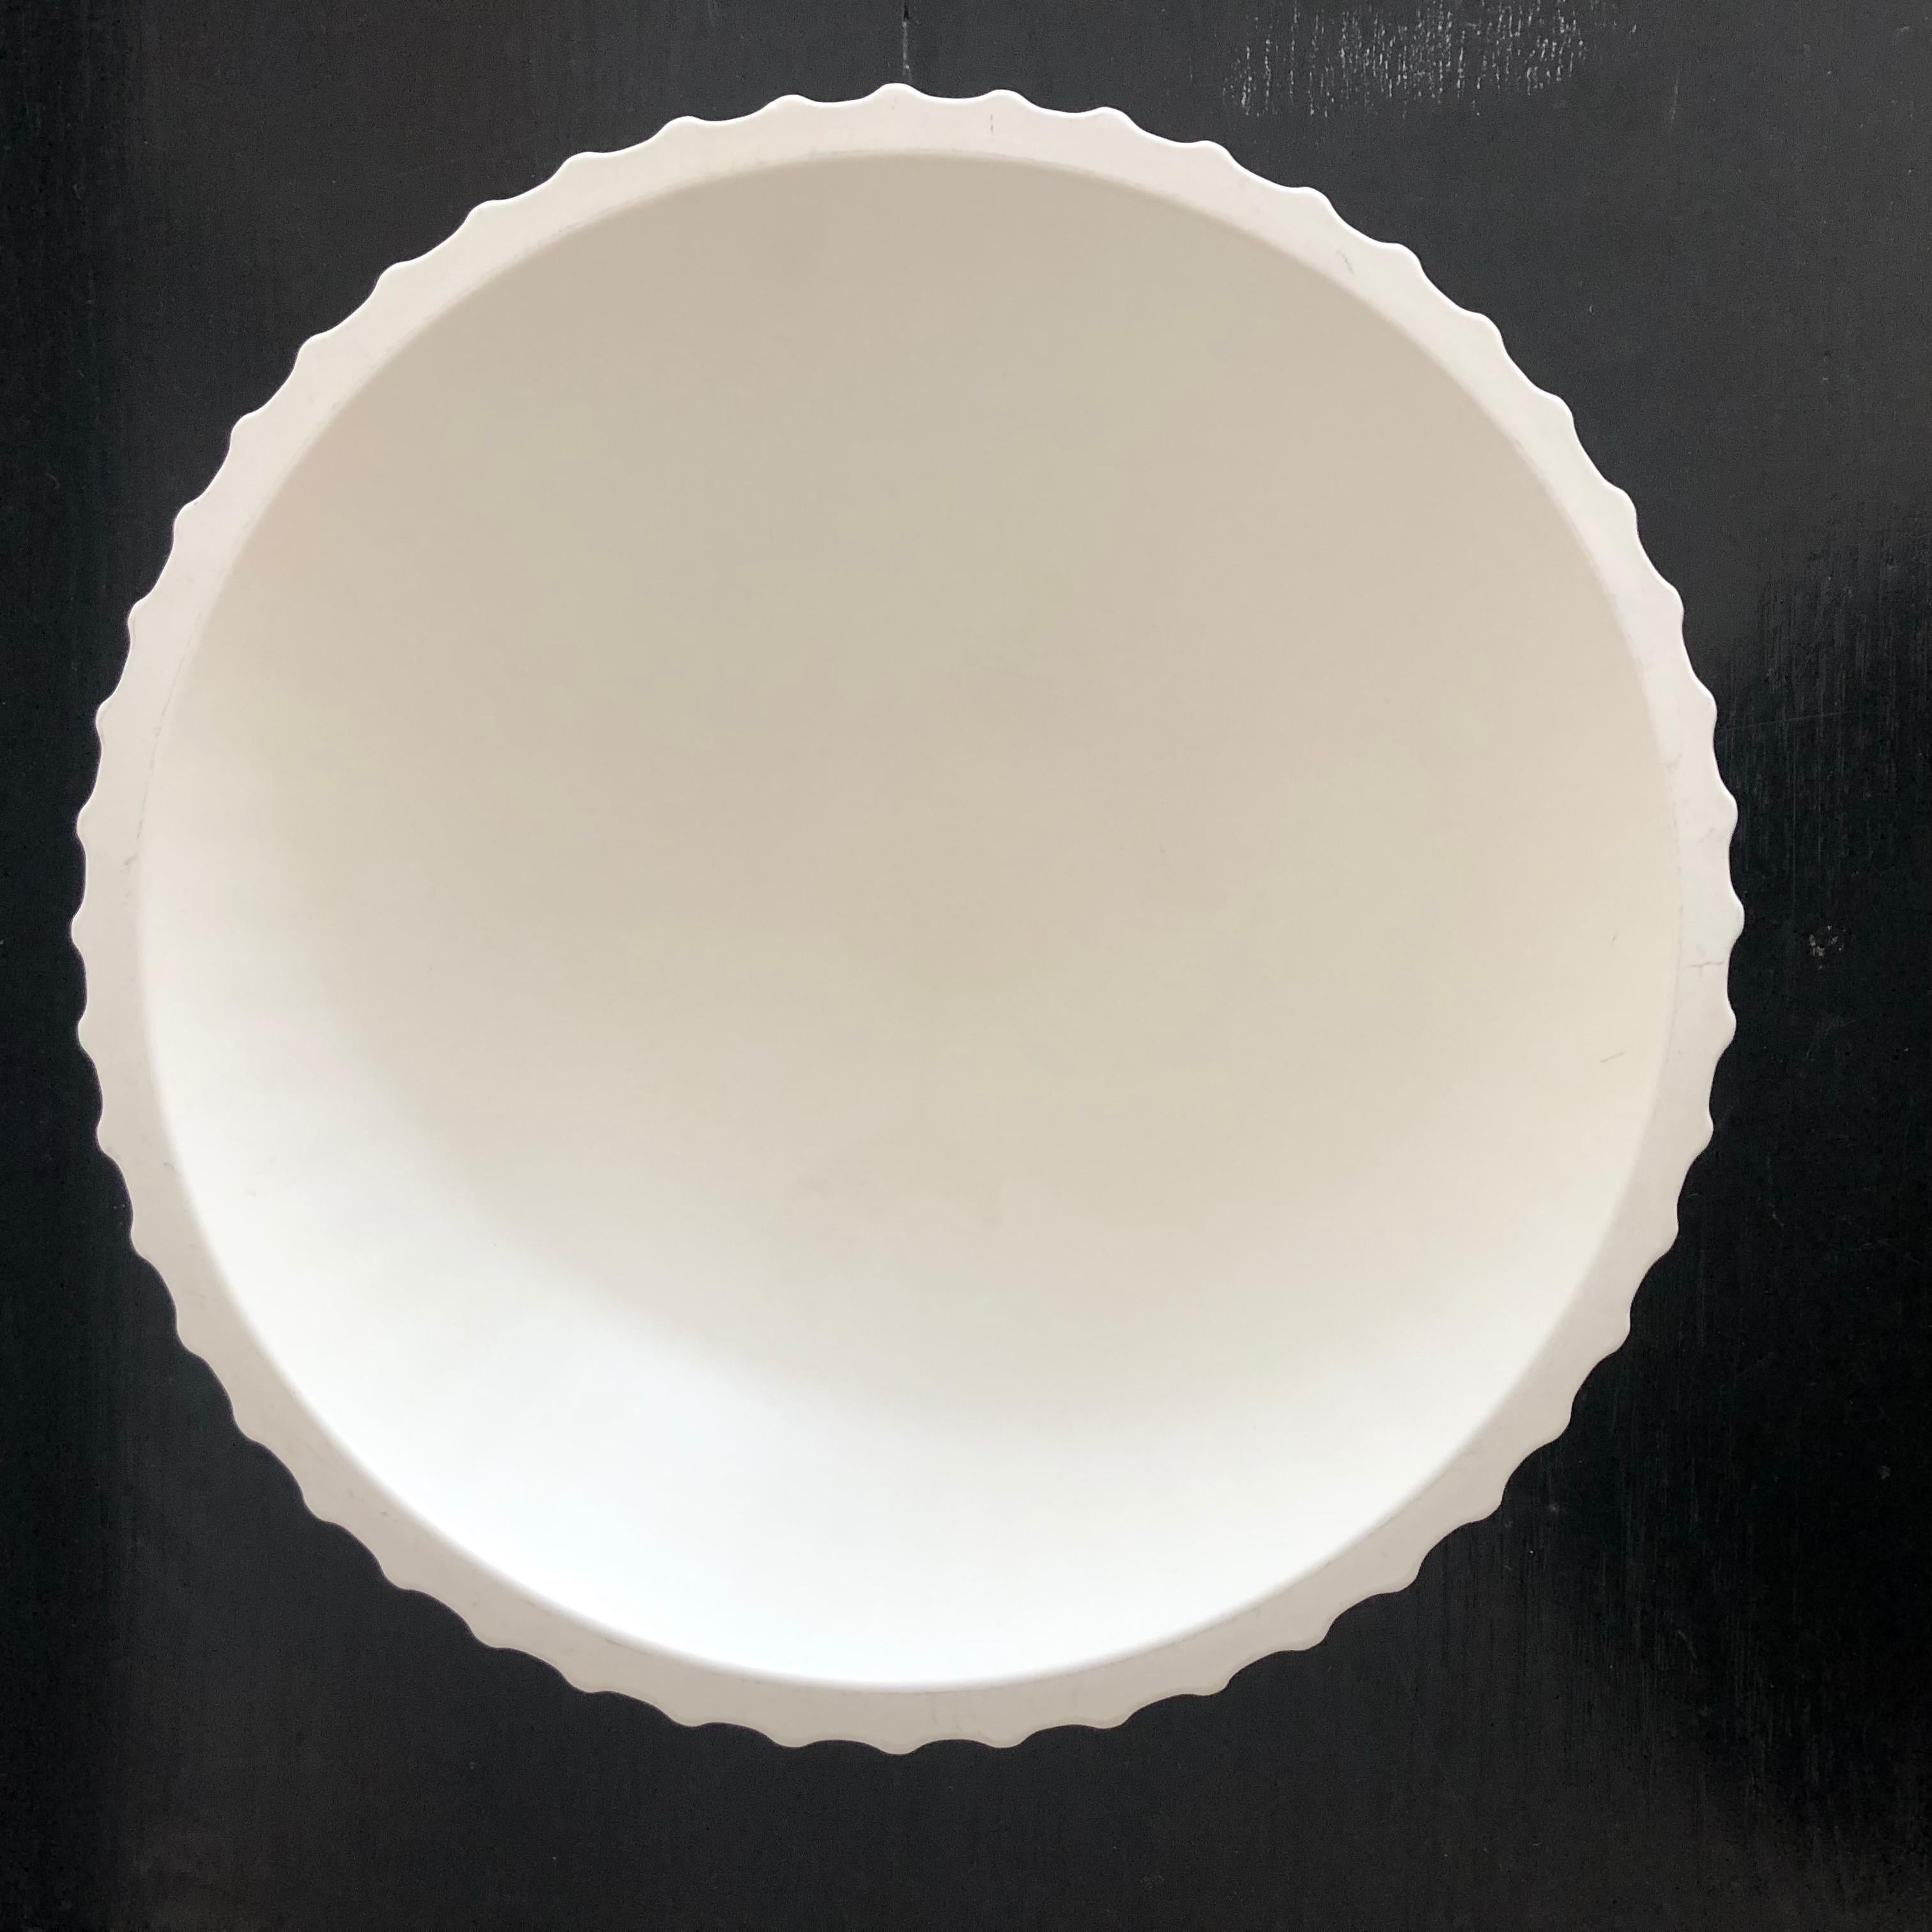 An Art Deco period white moonstone glazed bowl, designed by Keith Murray for Wedgwood, circa 1930s, of circular form with tapering reeded exterior on a circular foot ring. Signed with printed mark and paper collectors' inventory number label. We